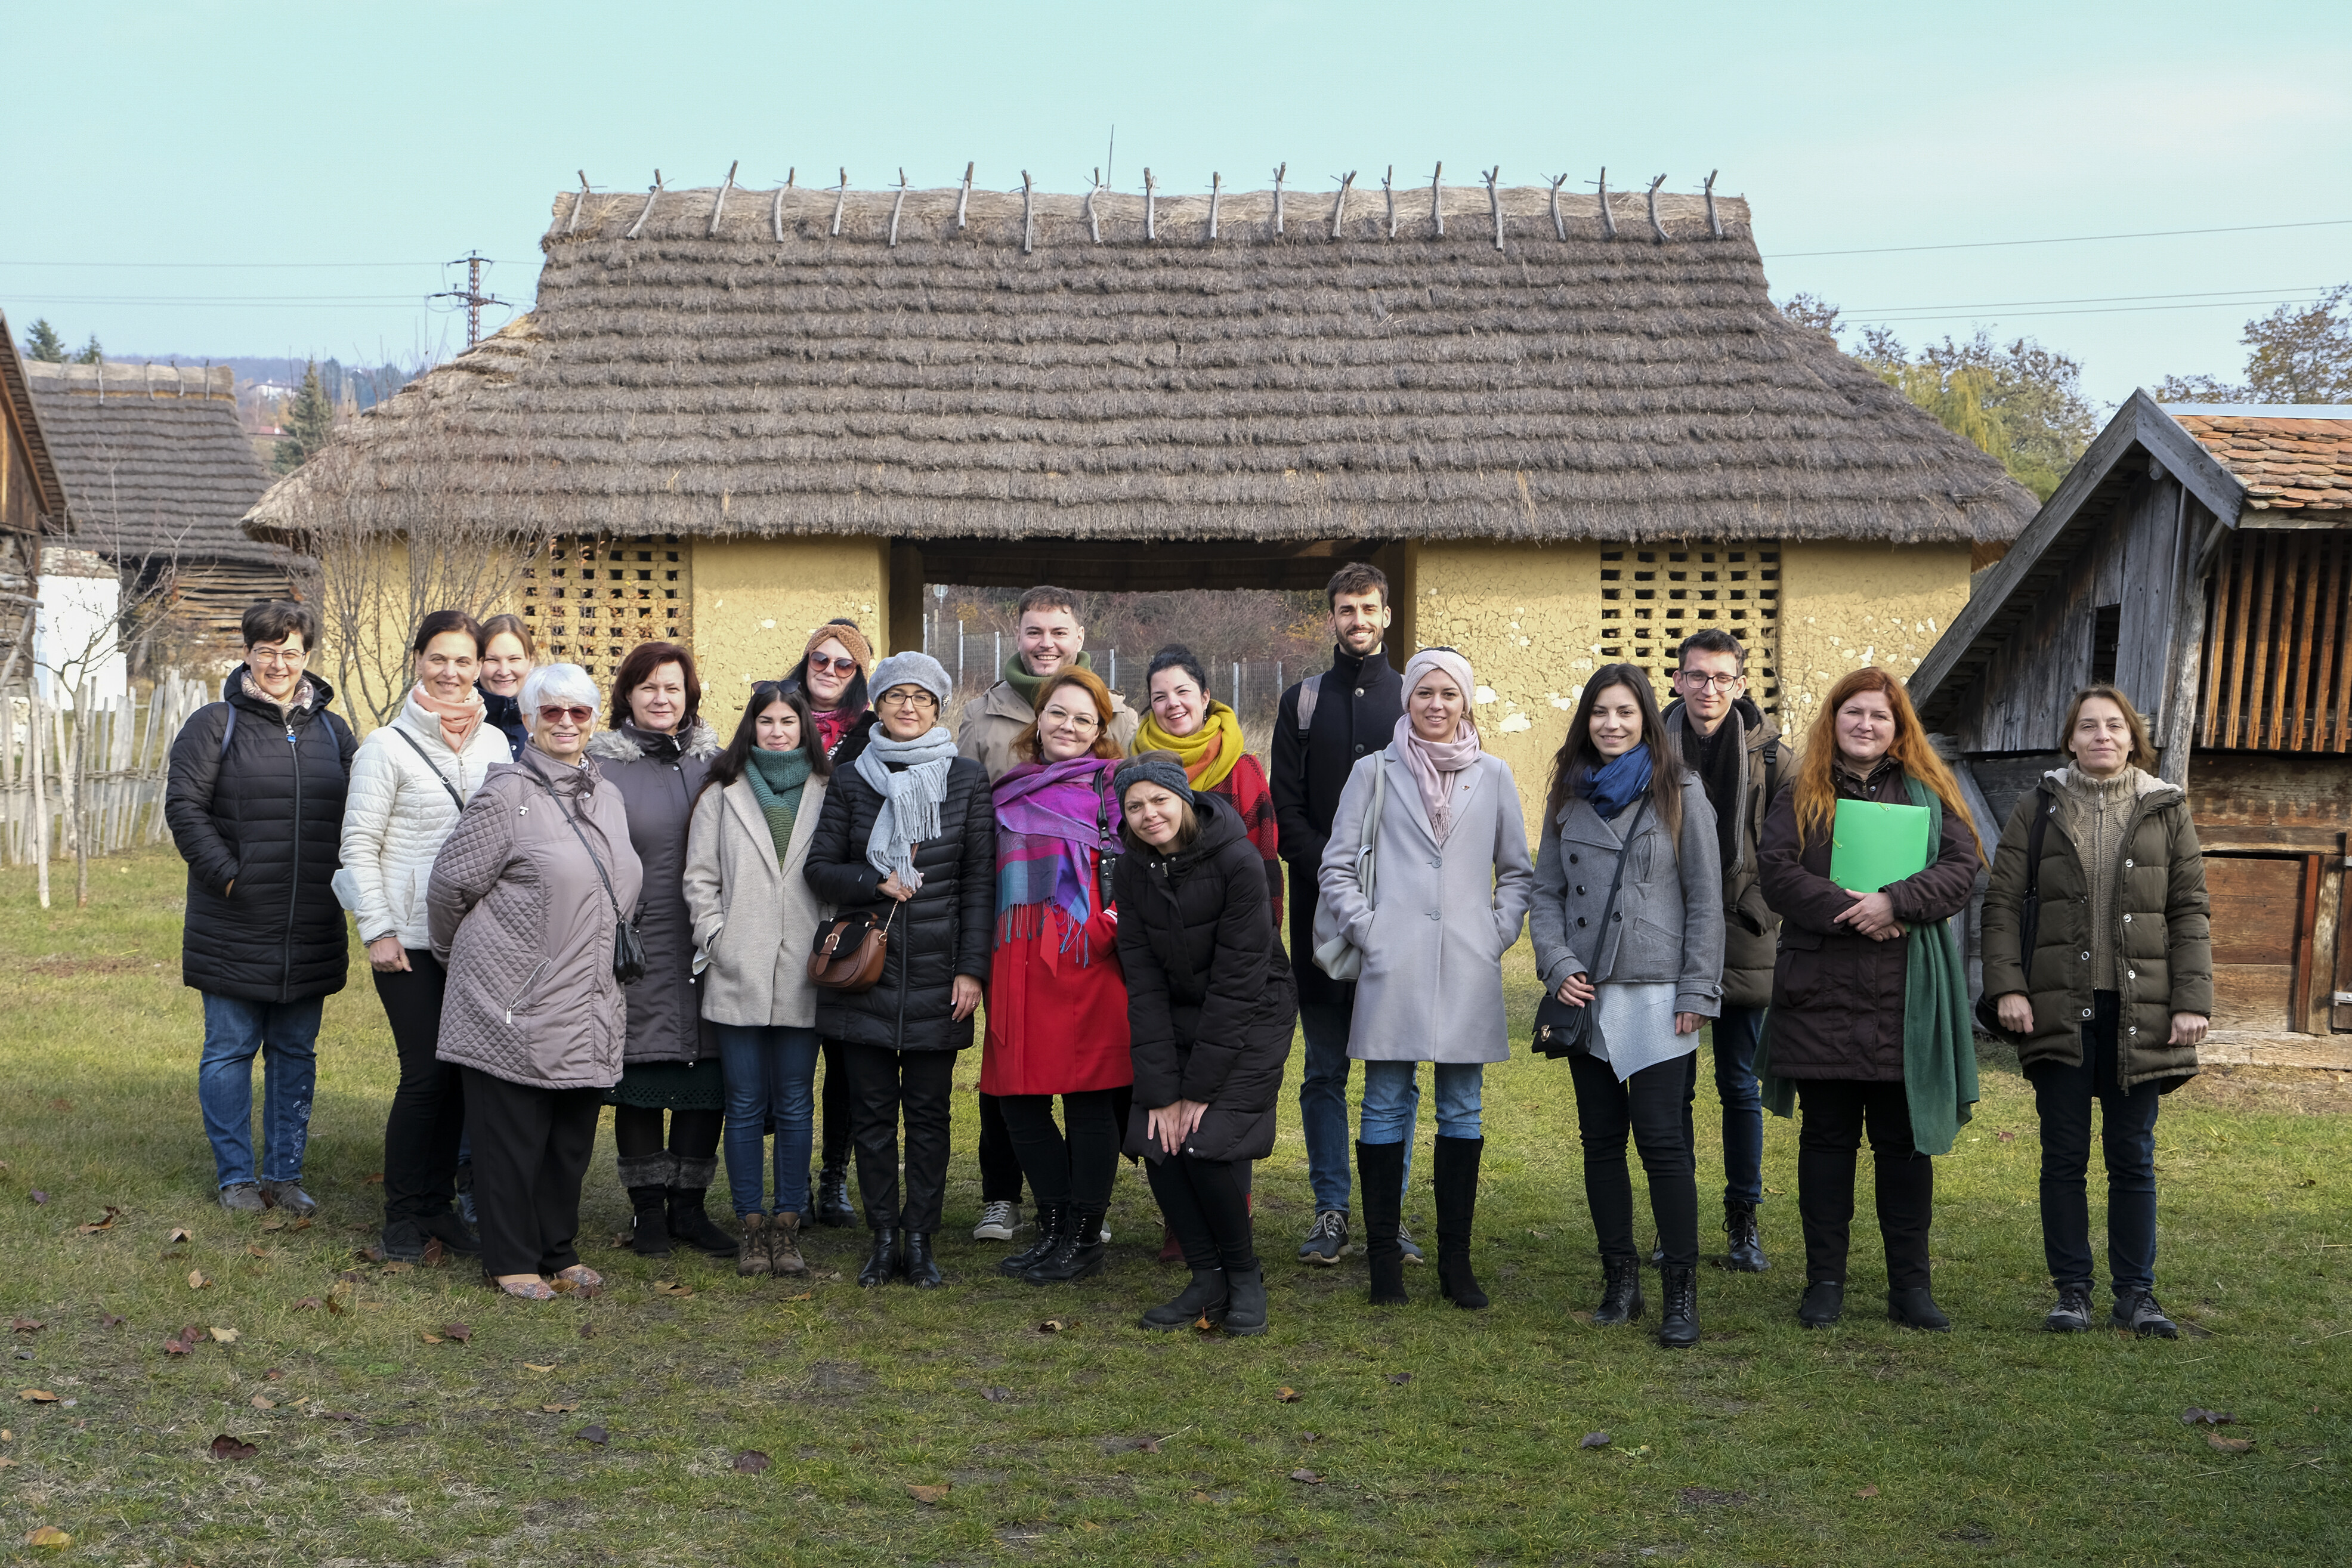 Capacity building in partnership across borders for future museums